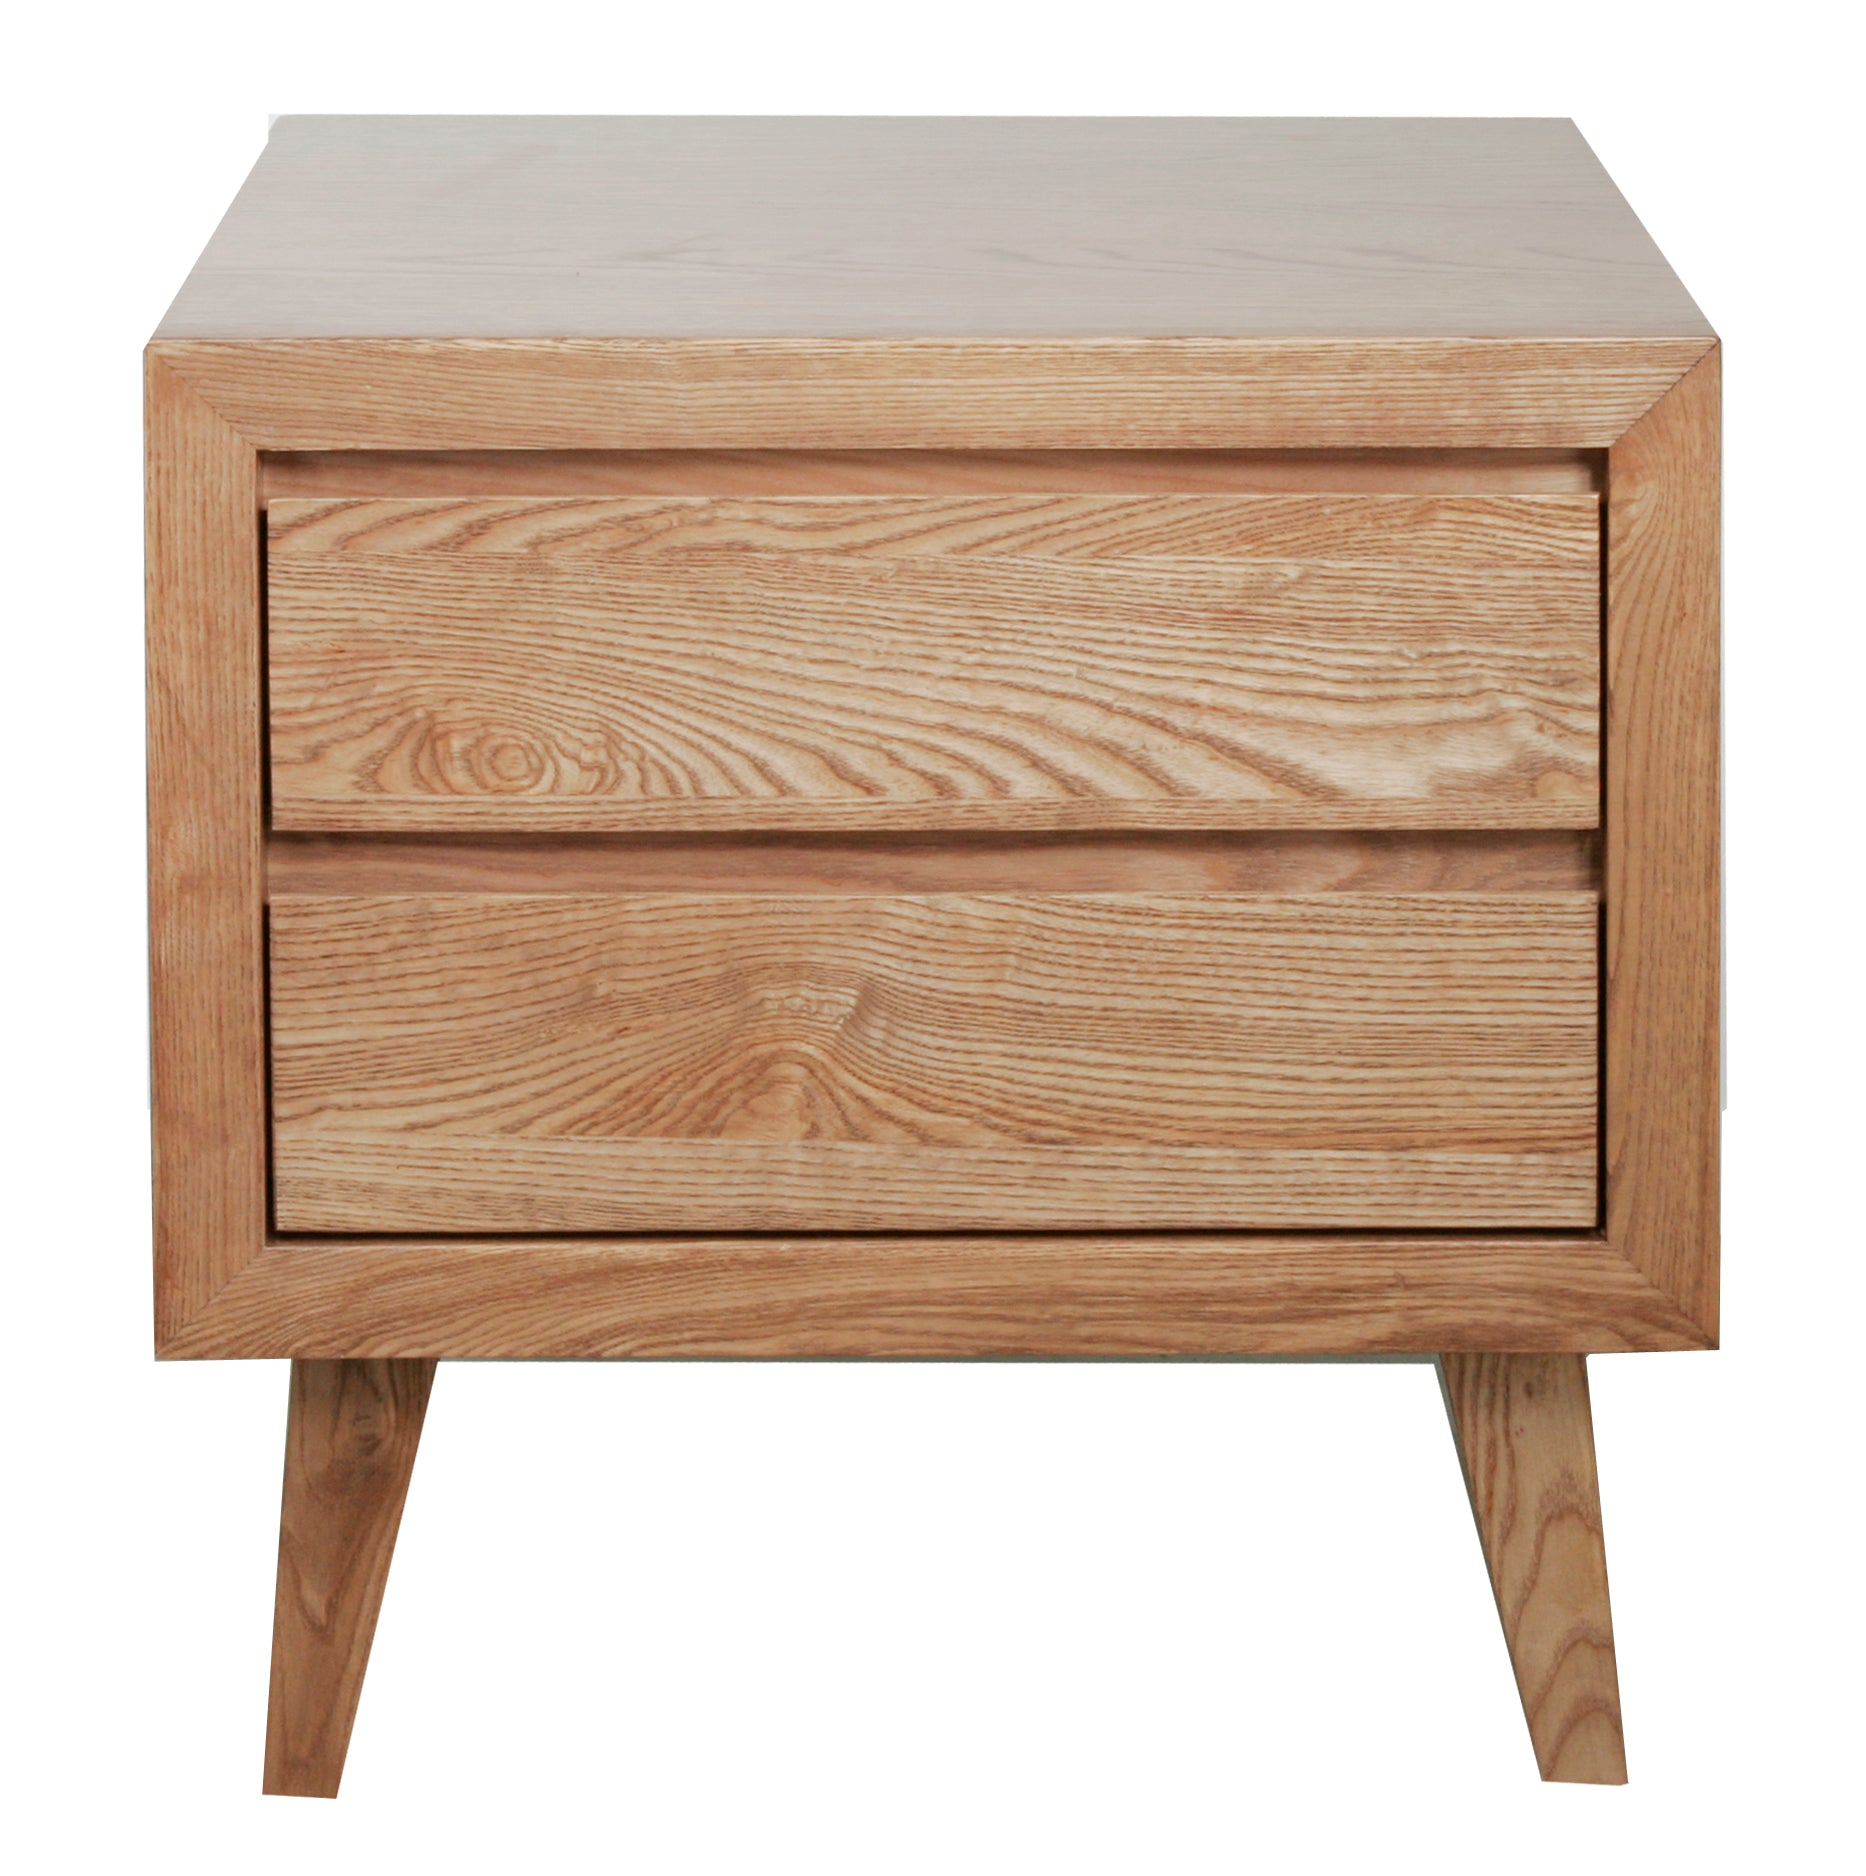 Alexis 2 Drawer Bedside Table